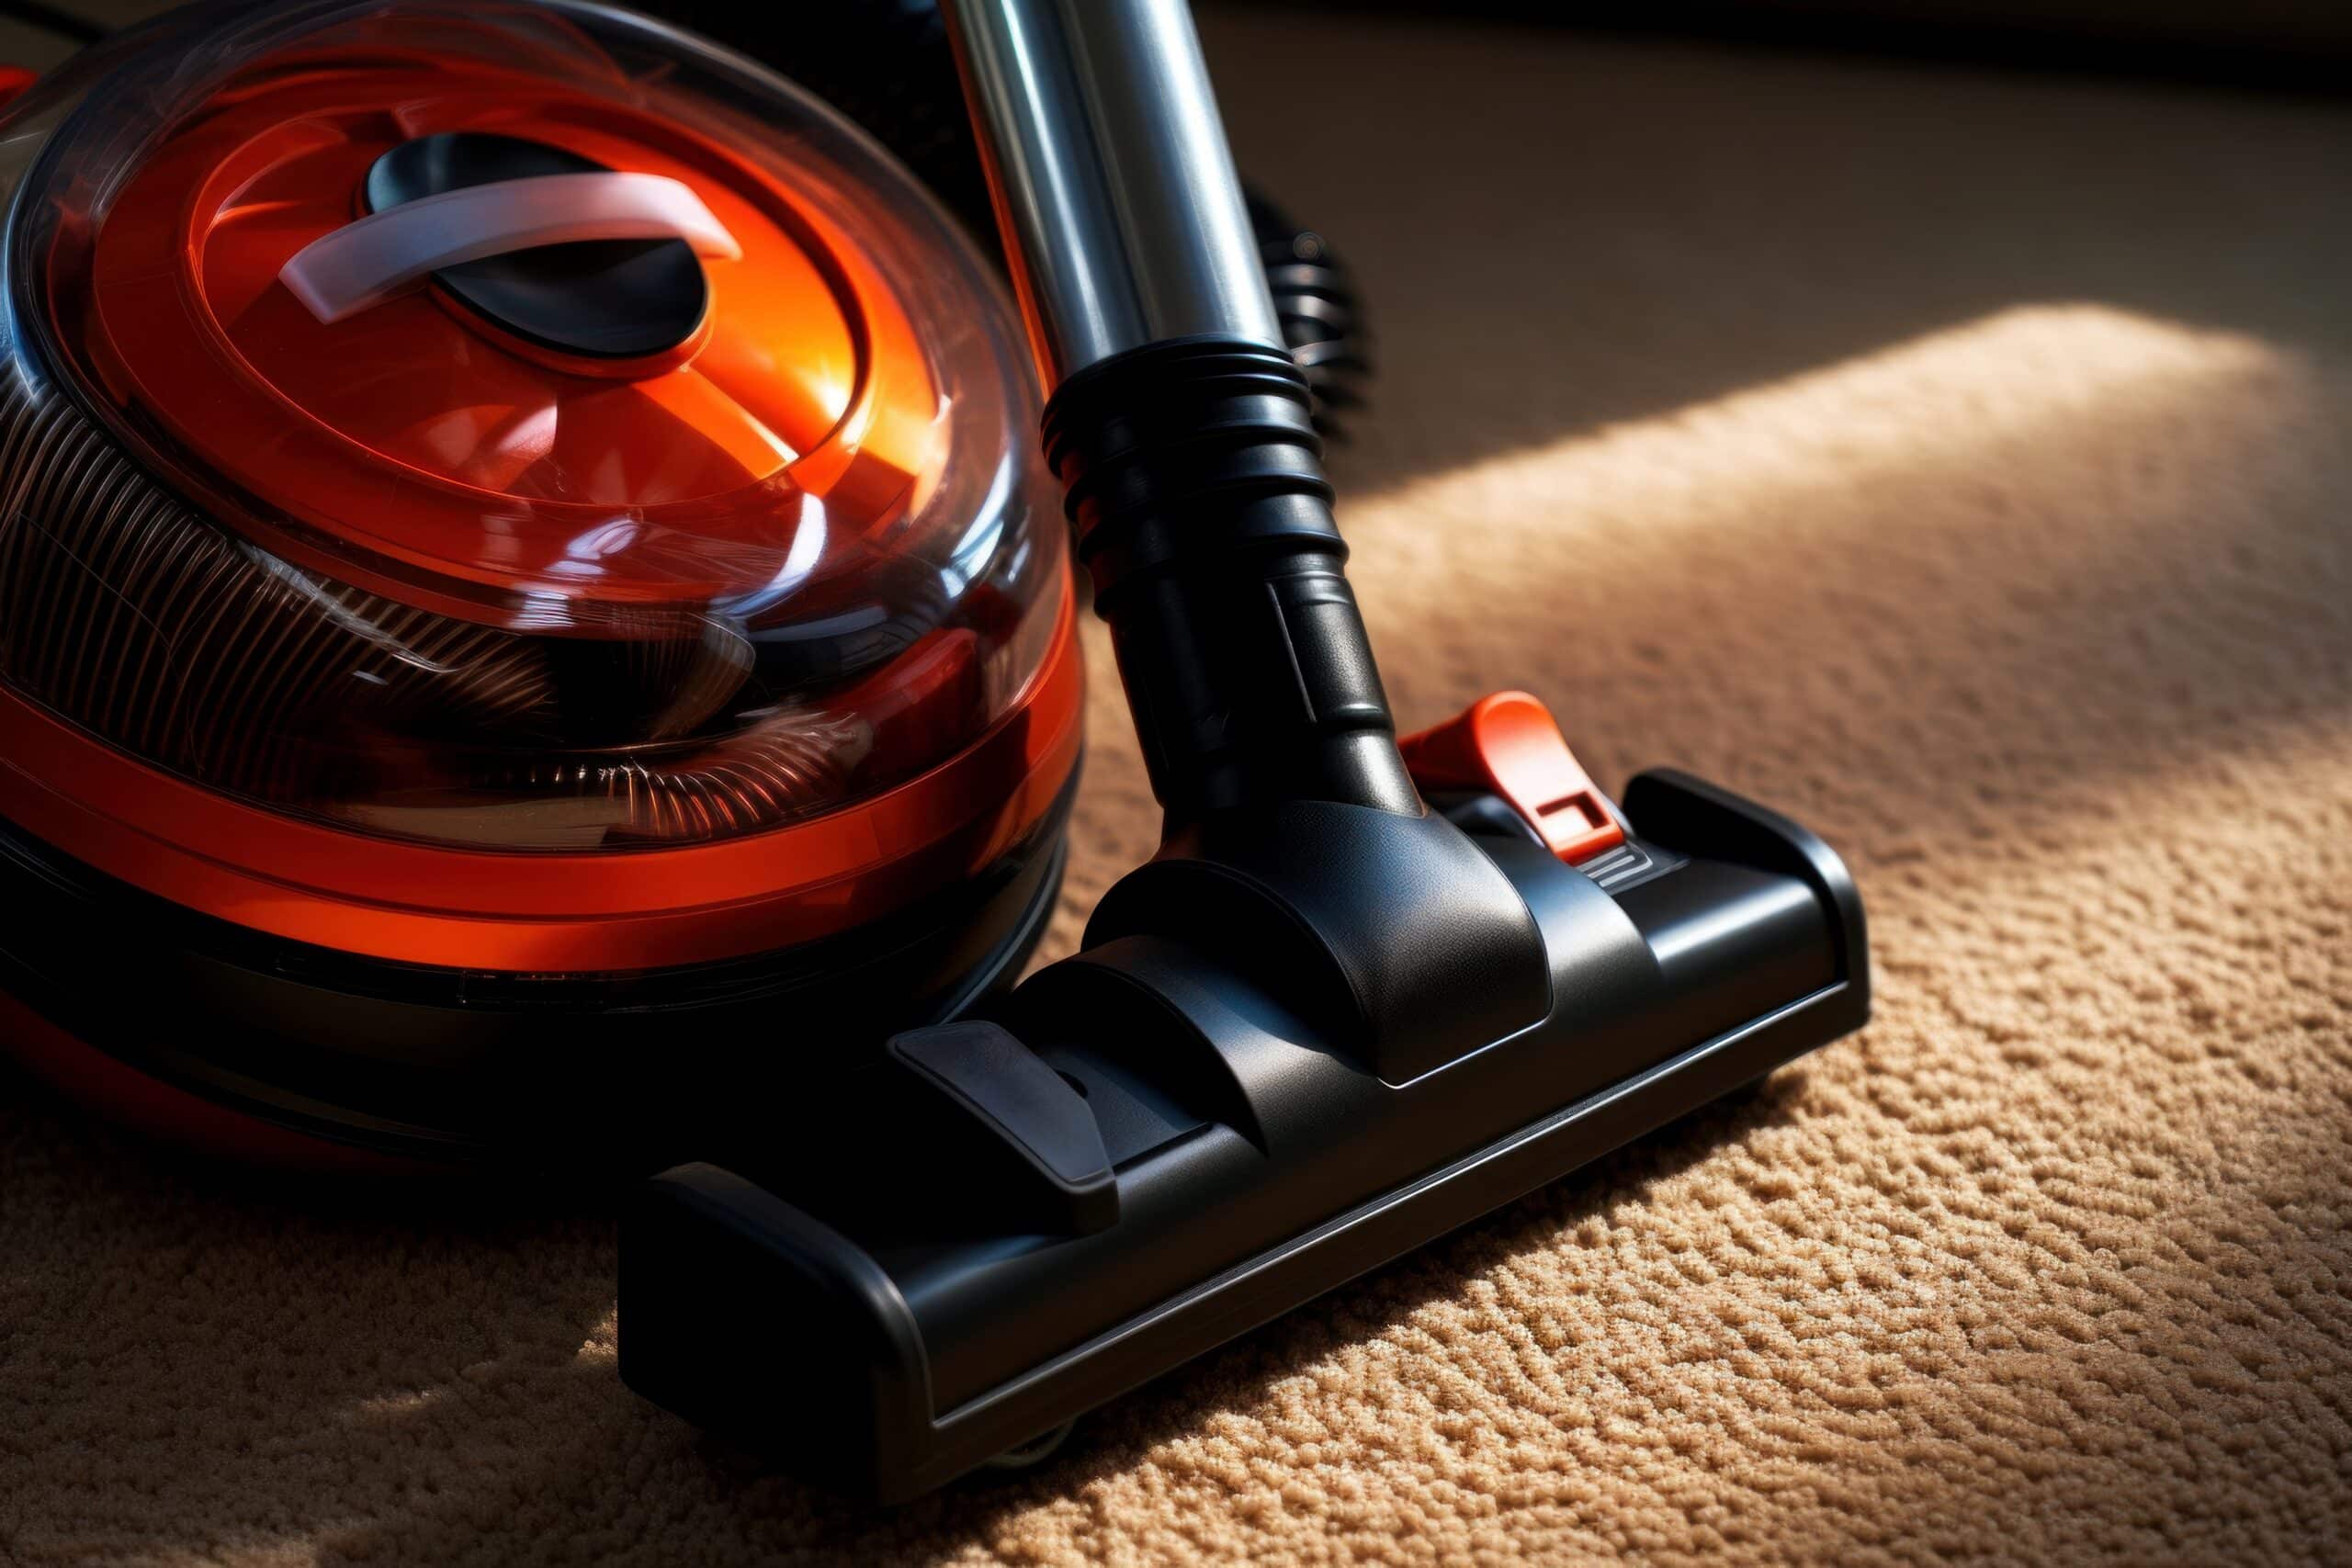 www.appr.com : How often should I use a steam cleaner on my upholstery and carpet?